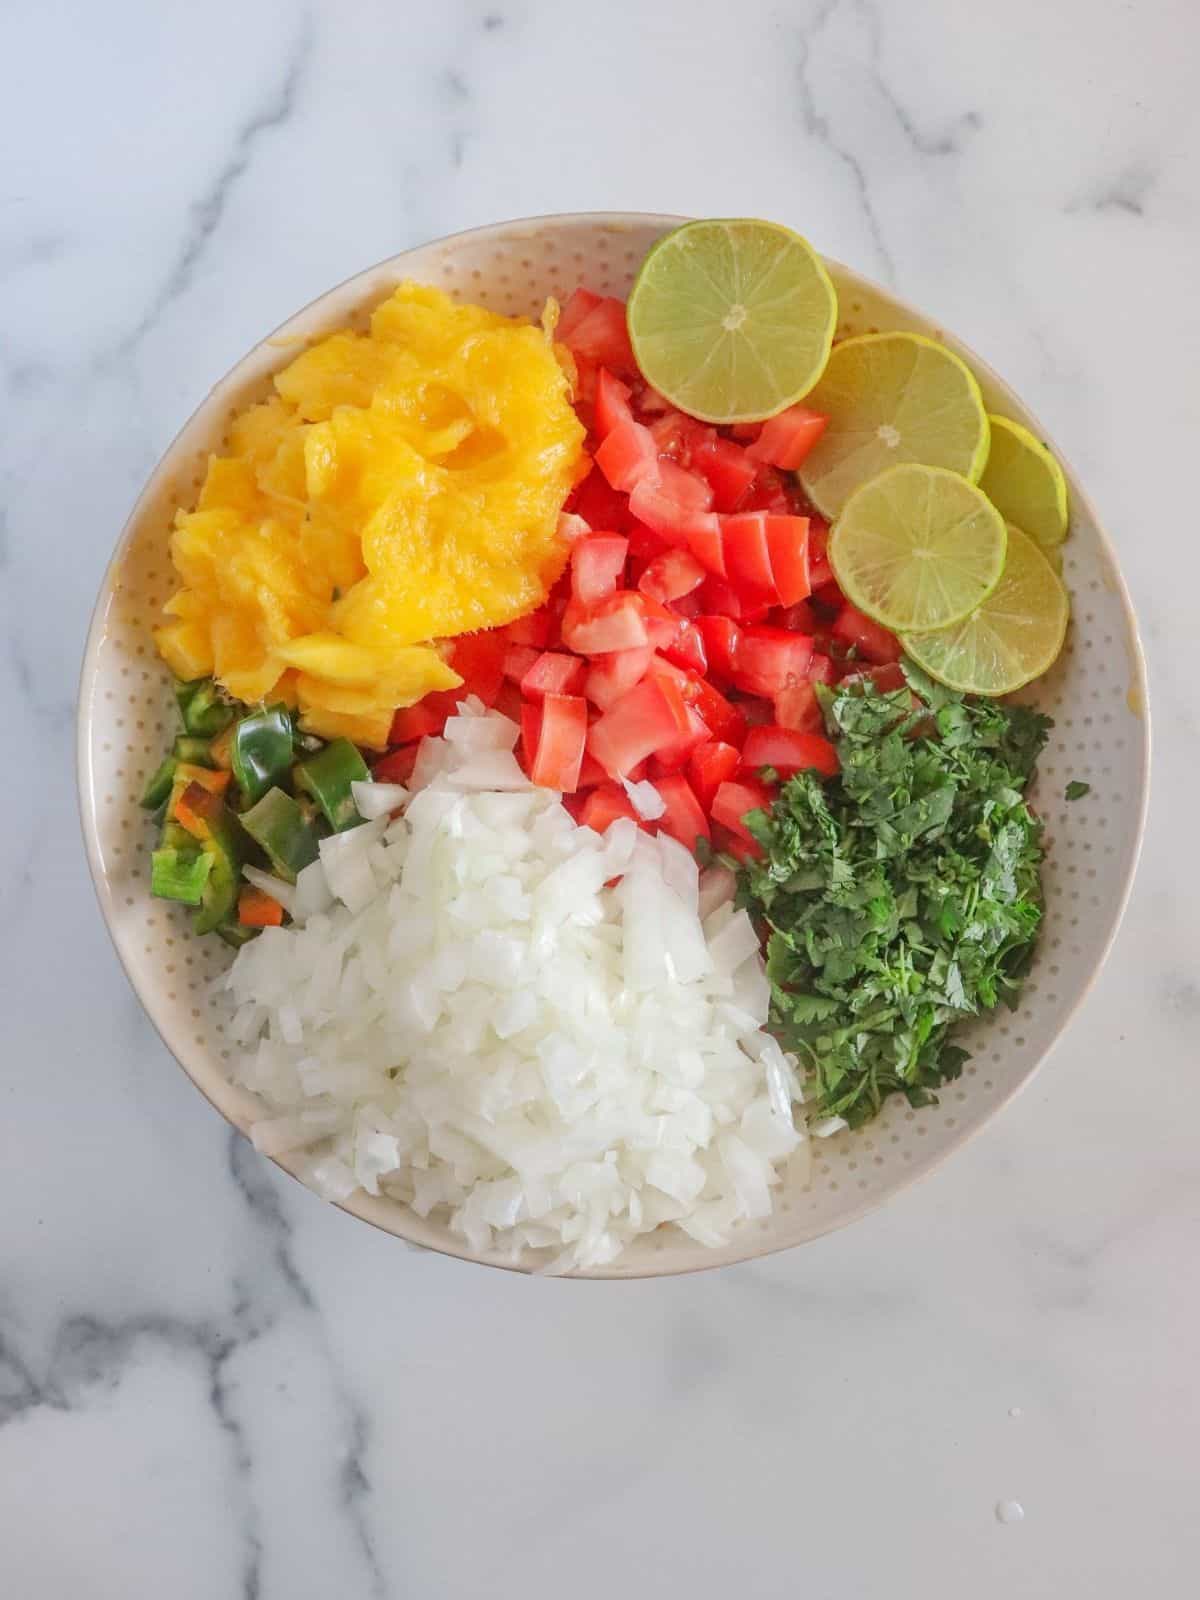 Bowl with diced vegetables, limes, onion and cilantro